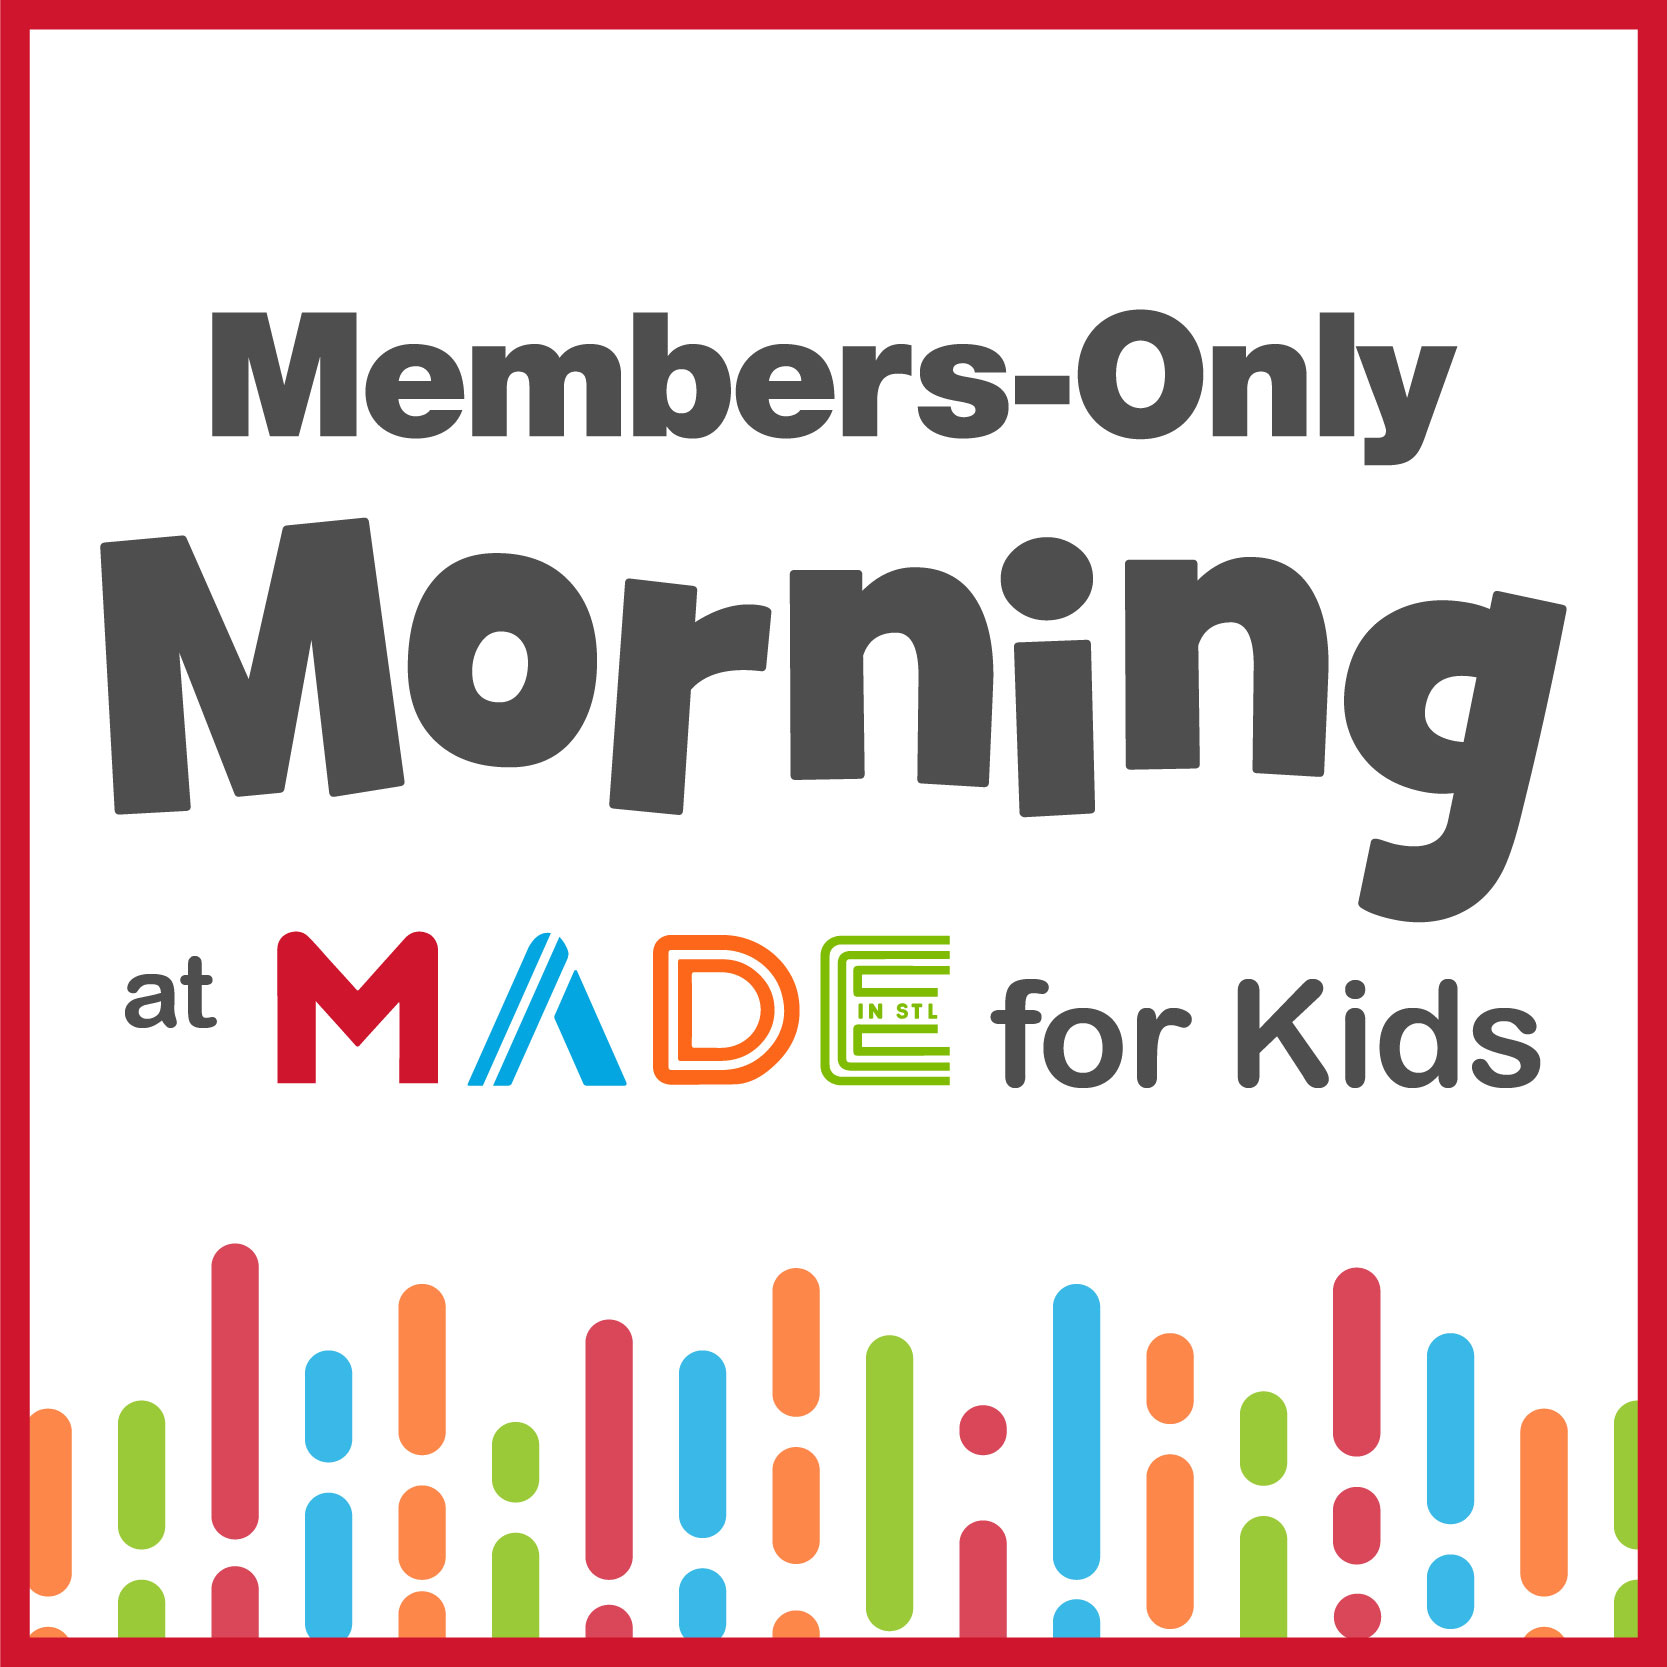 Members-Only Morning at MADE for Kids